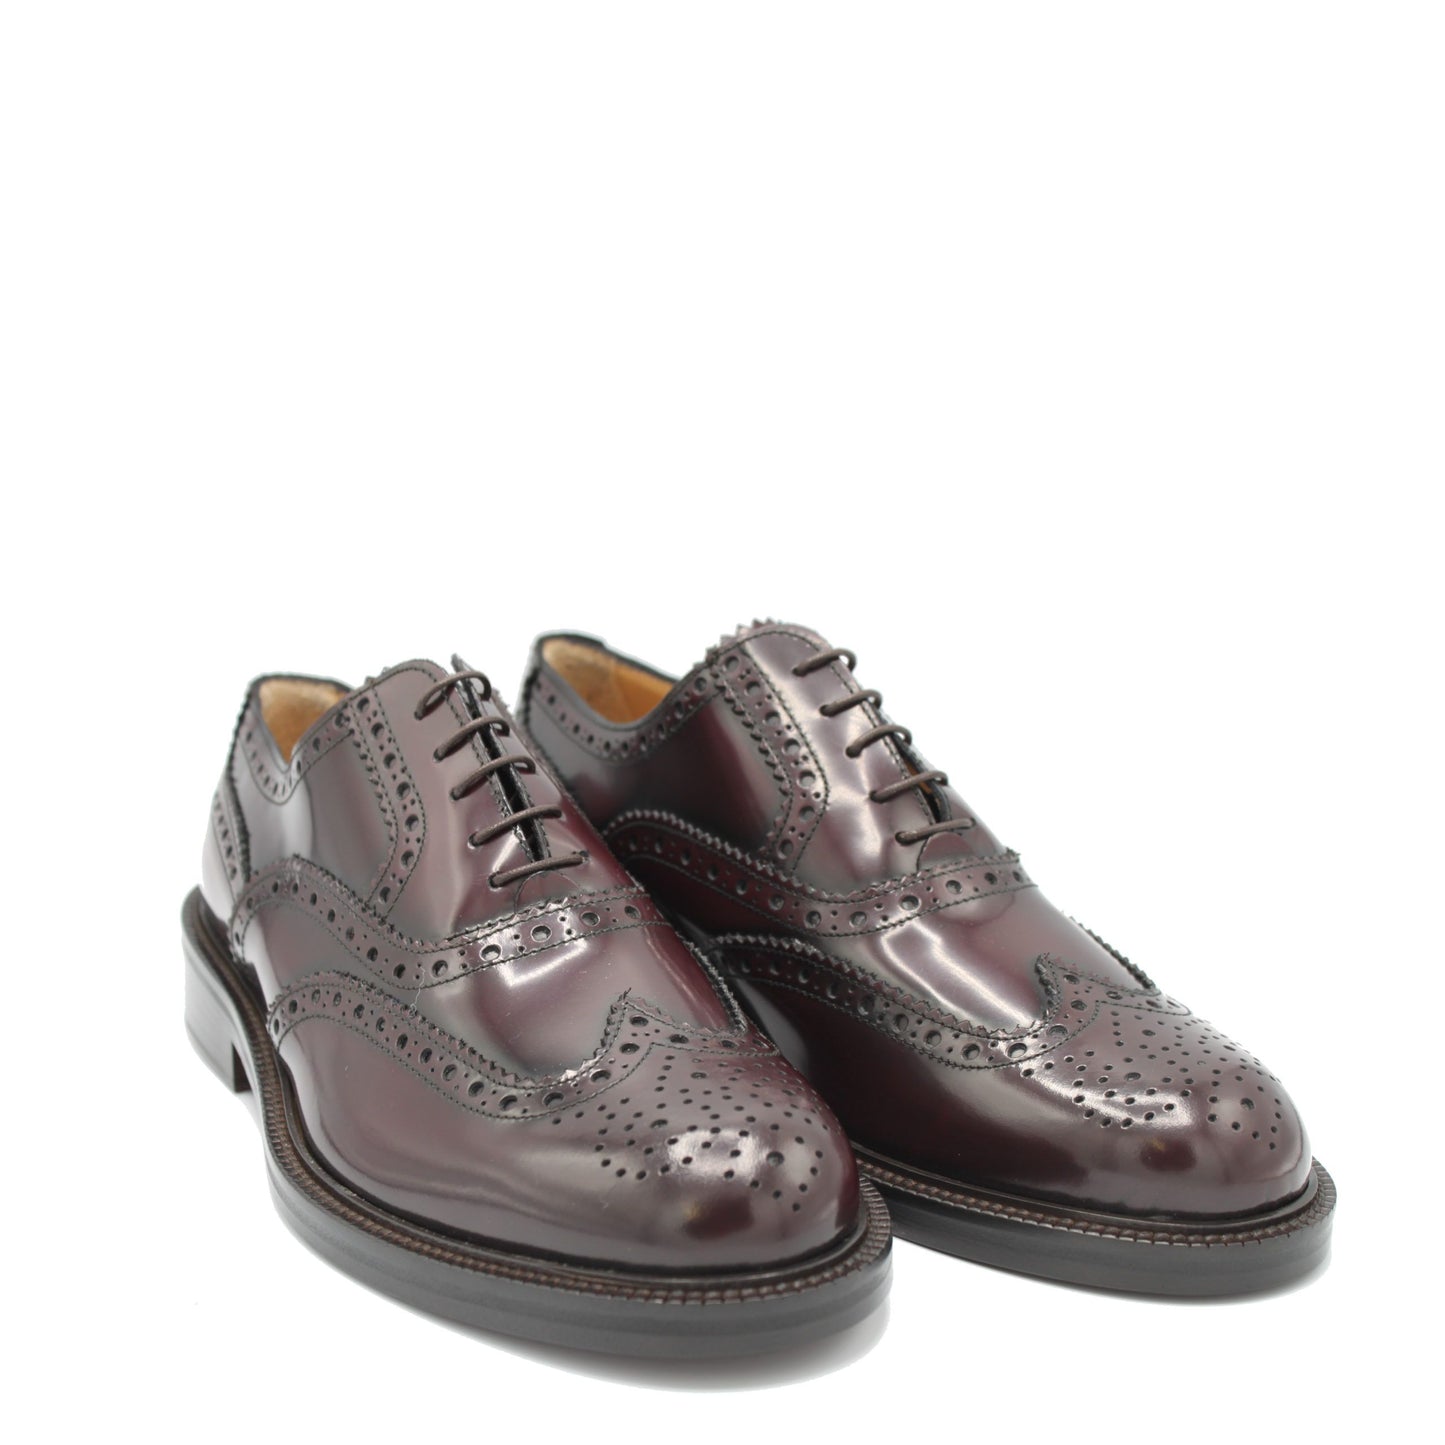 Saxone Bordeaux Spazzolato Leather Mens Laced Full Brogue Shoes